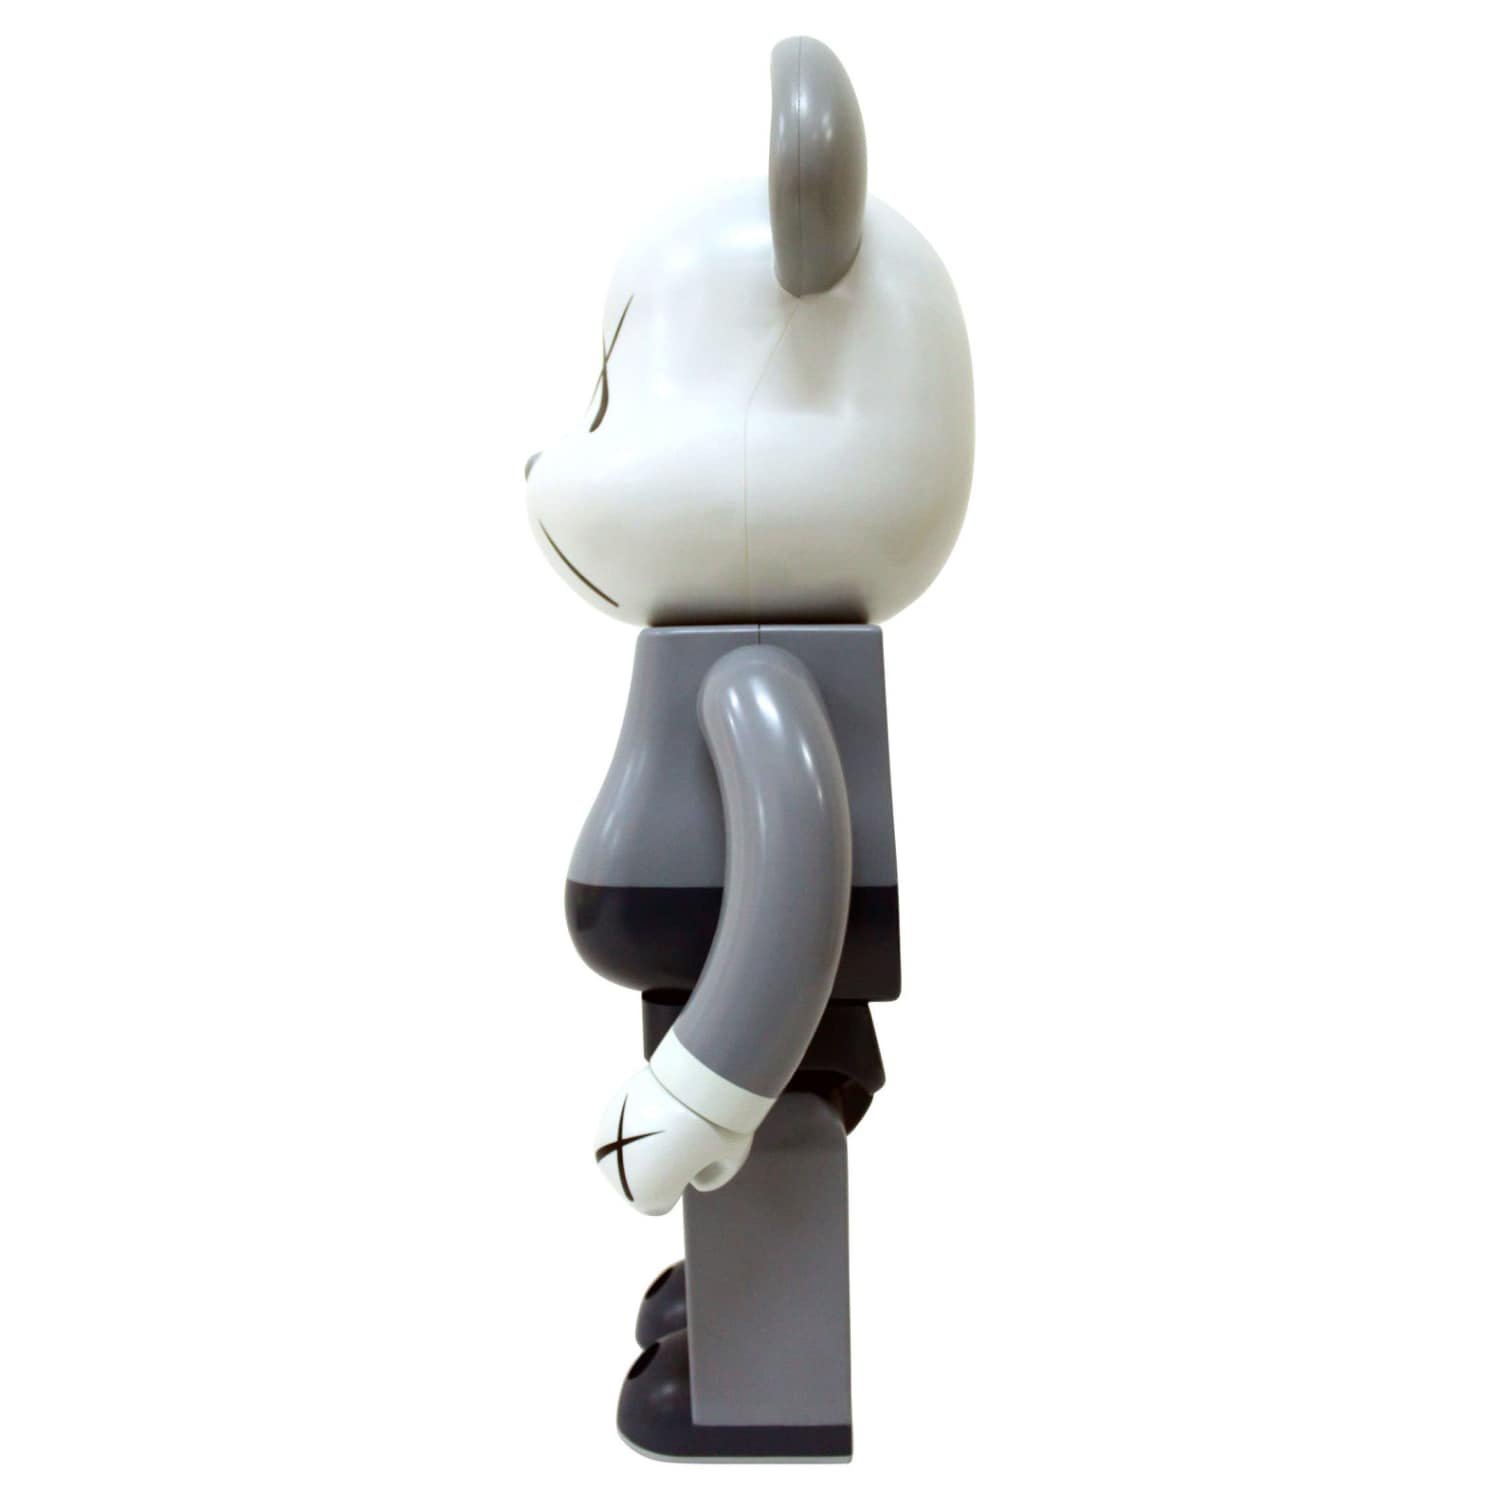 Kaws Companion” from Be@rbrick - Dope! Gallery